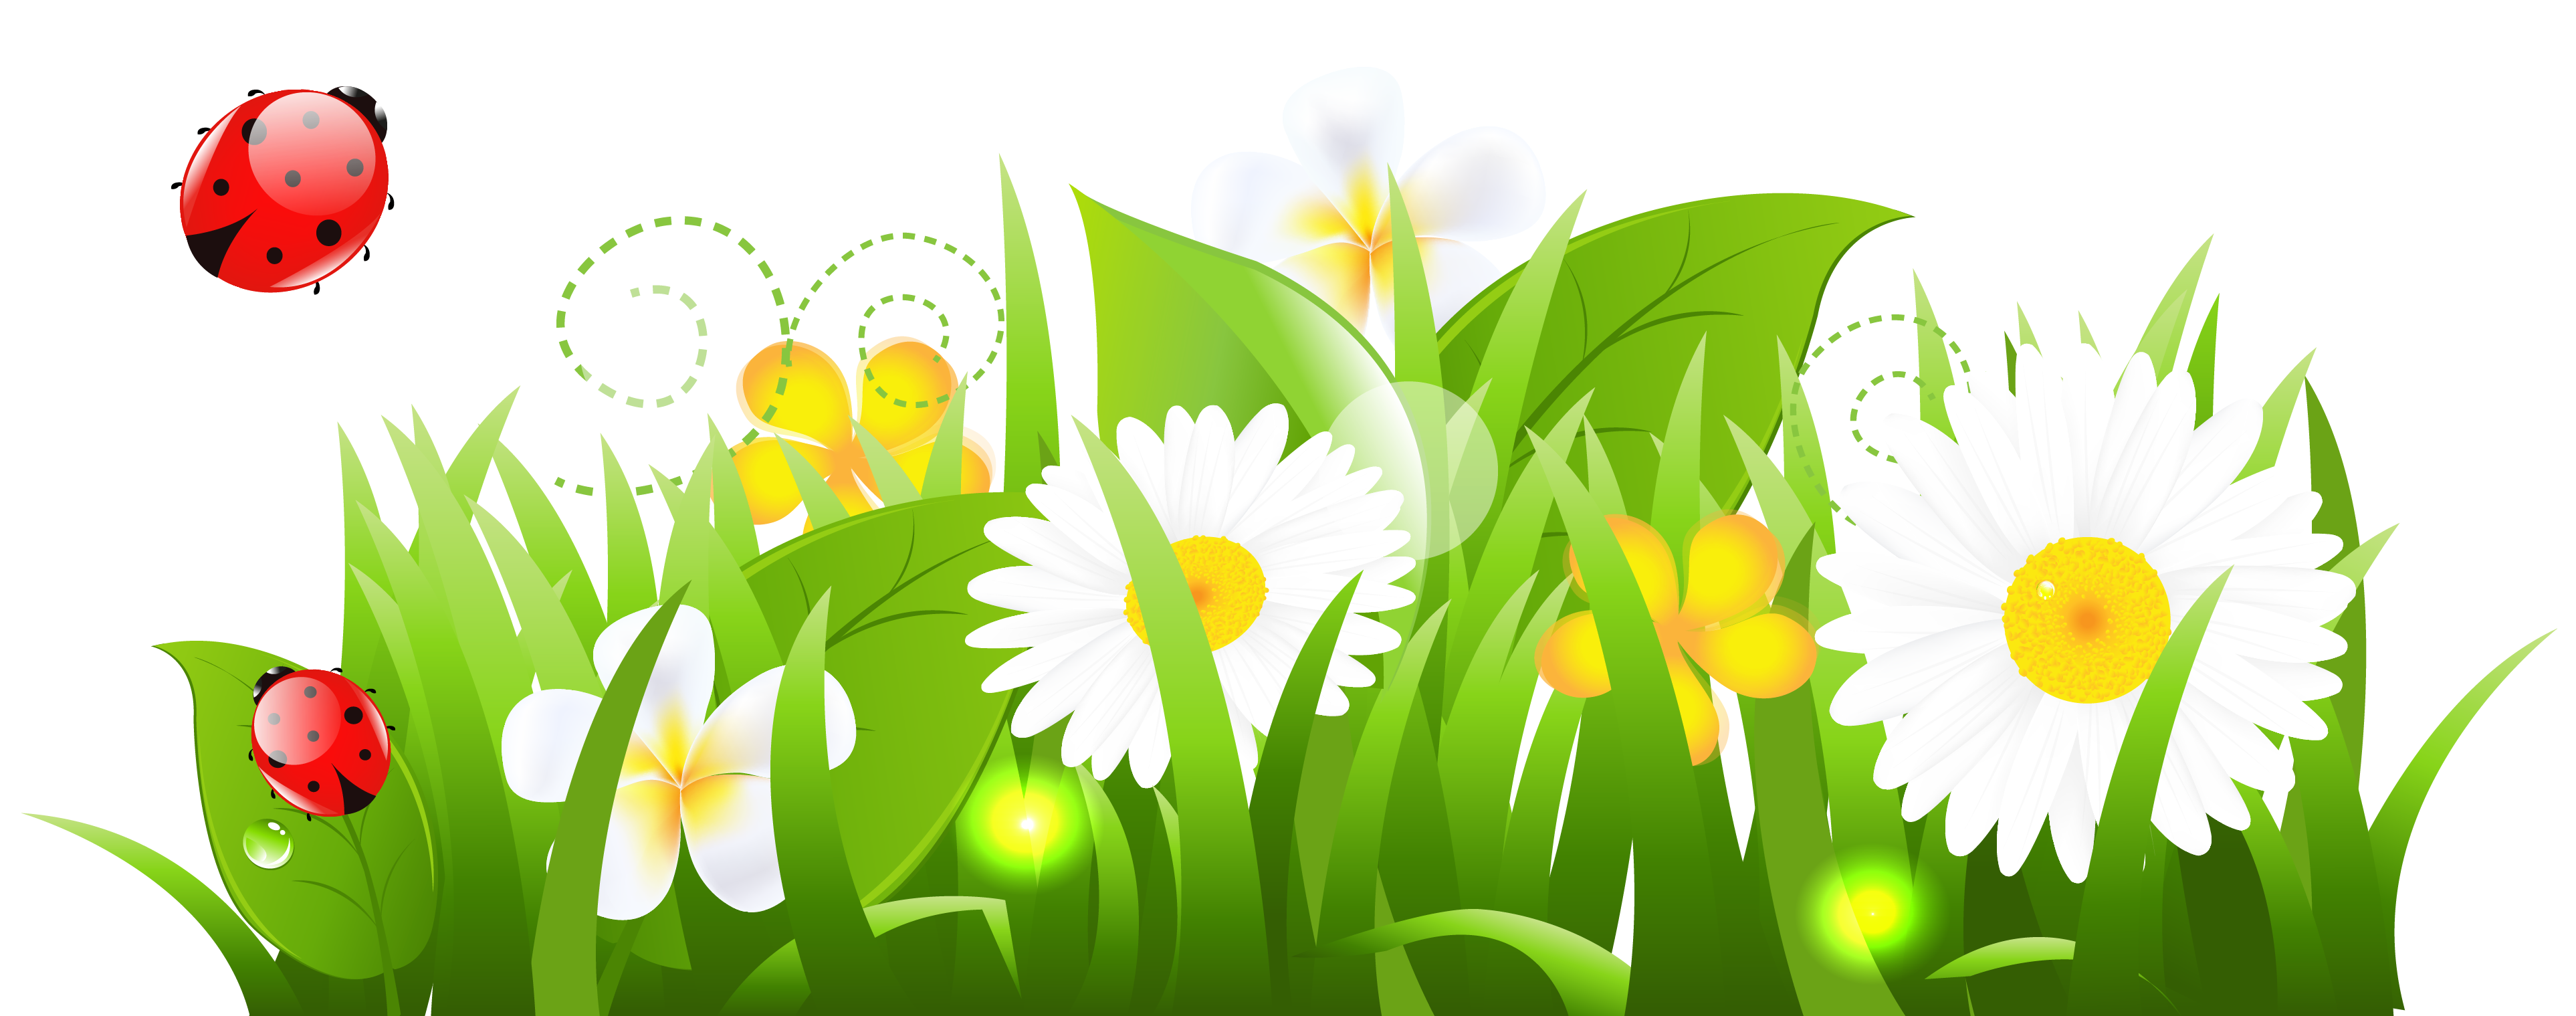 free green flower clipart - photo #42